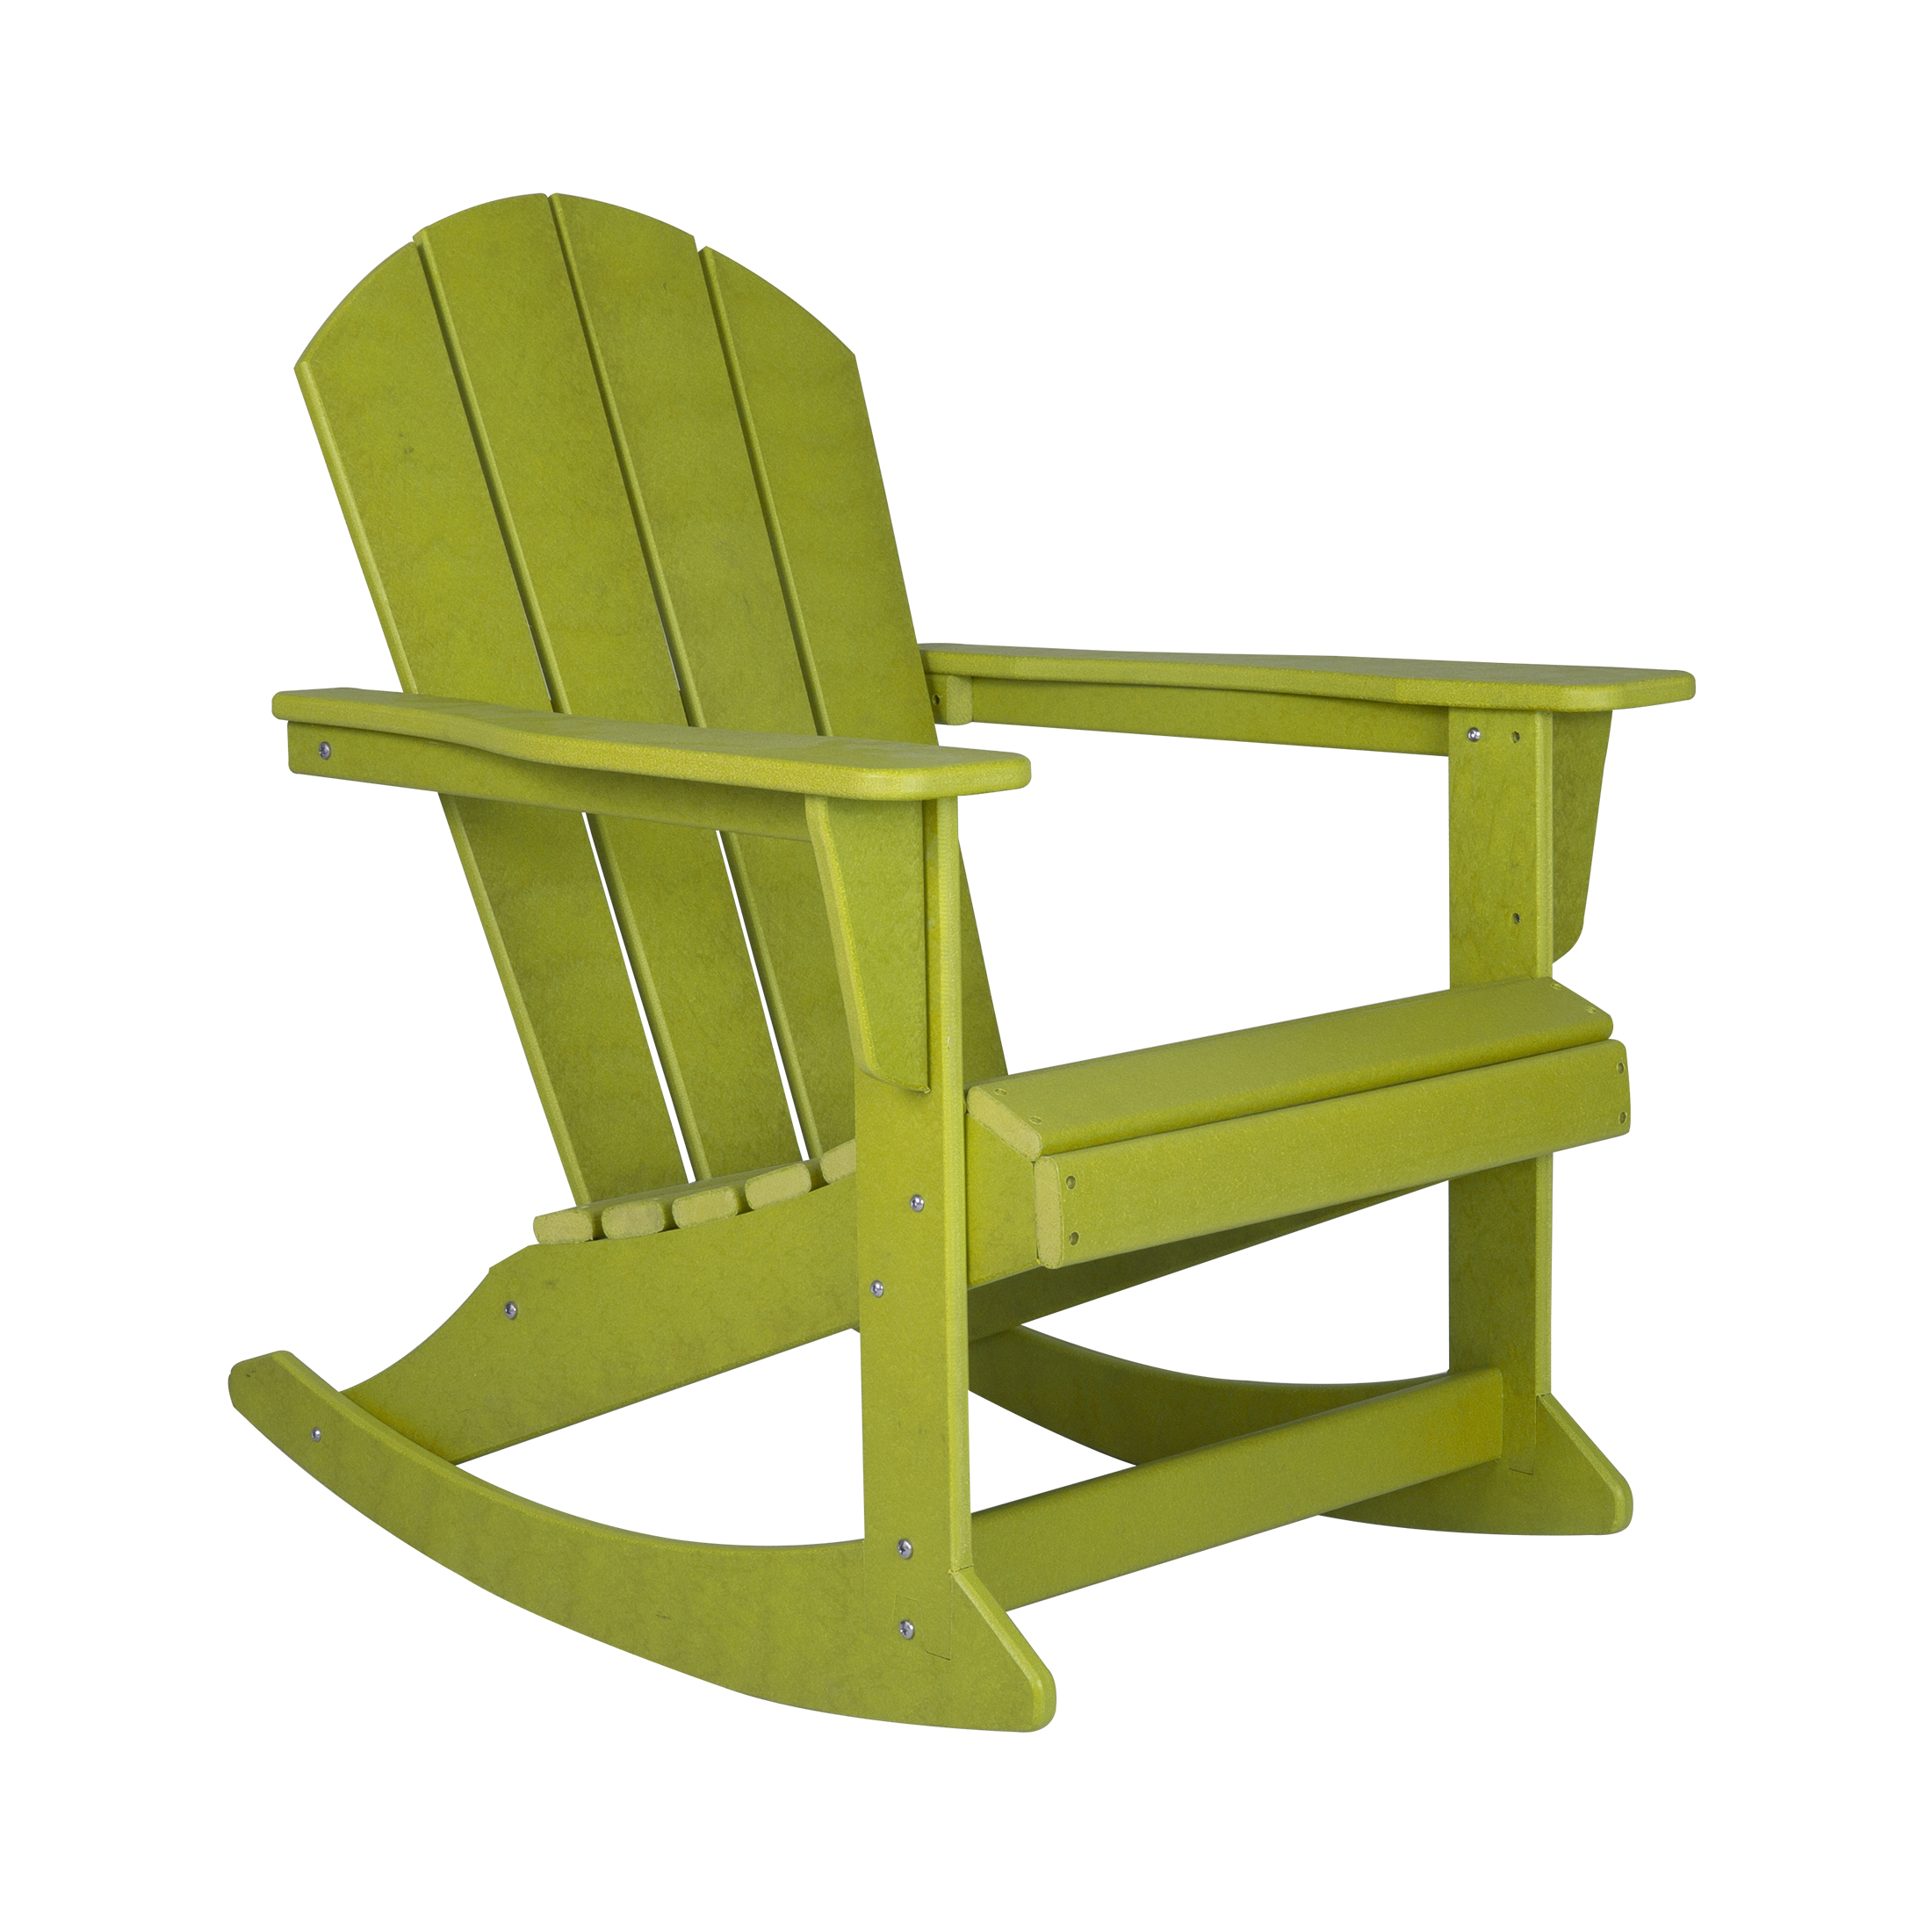 GARDEN Plastic Adirondack Rocking Chair for Outdoor Patio Porch Seating, Lime - image 4 of 7